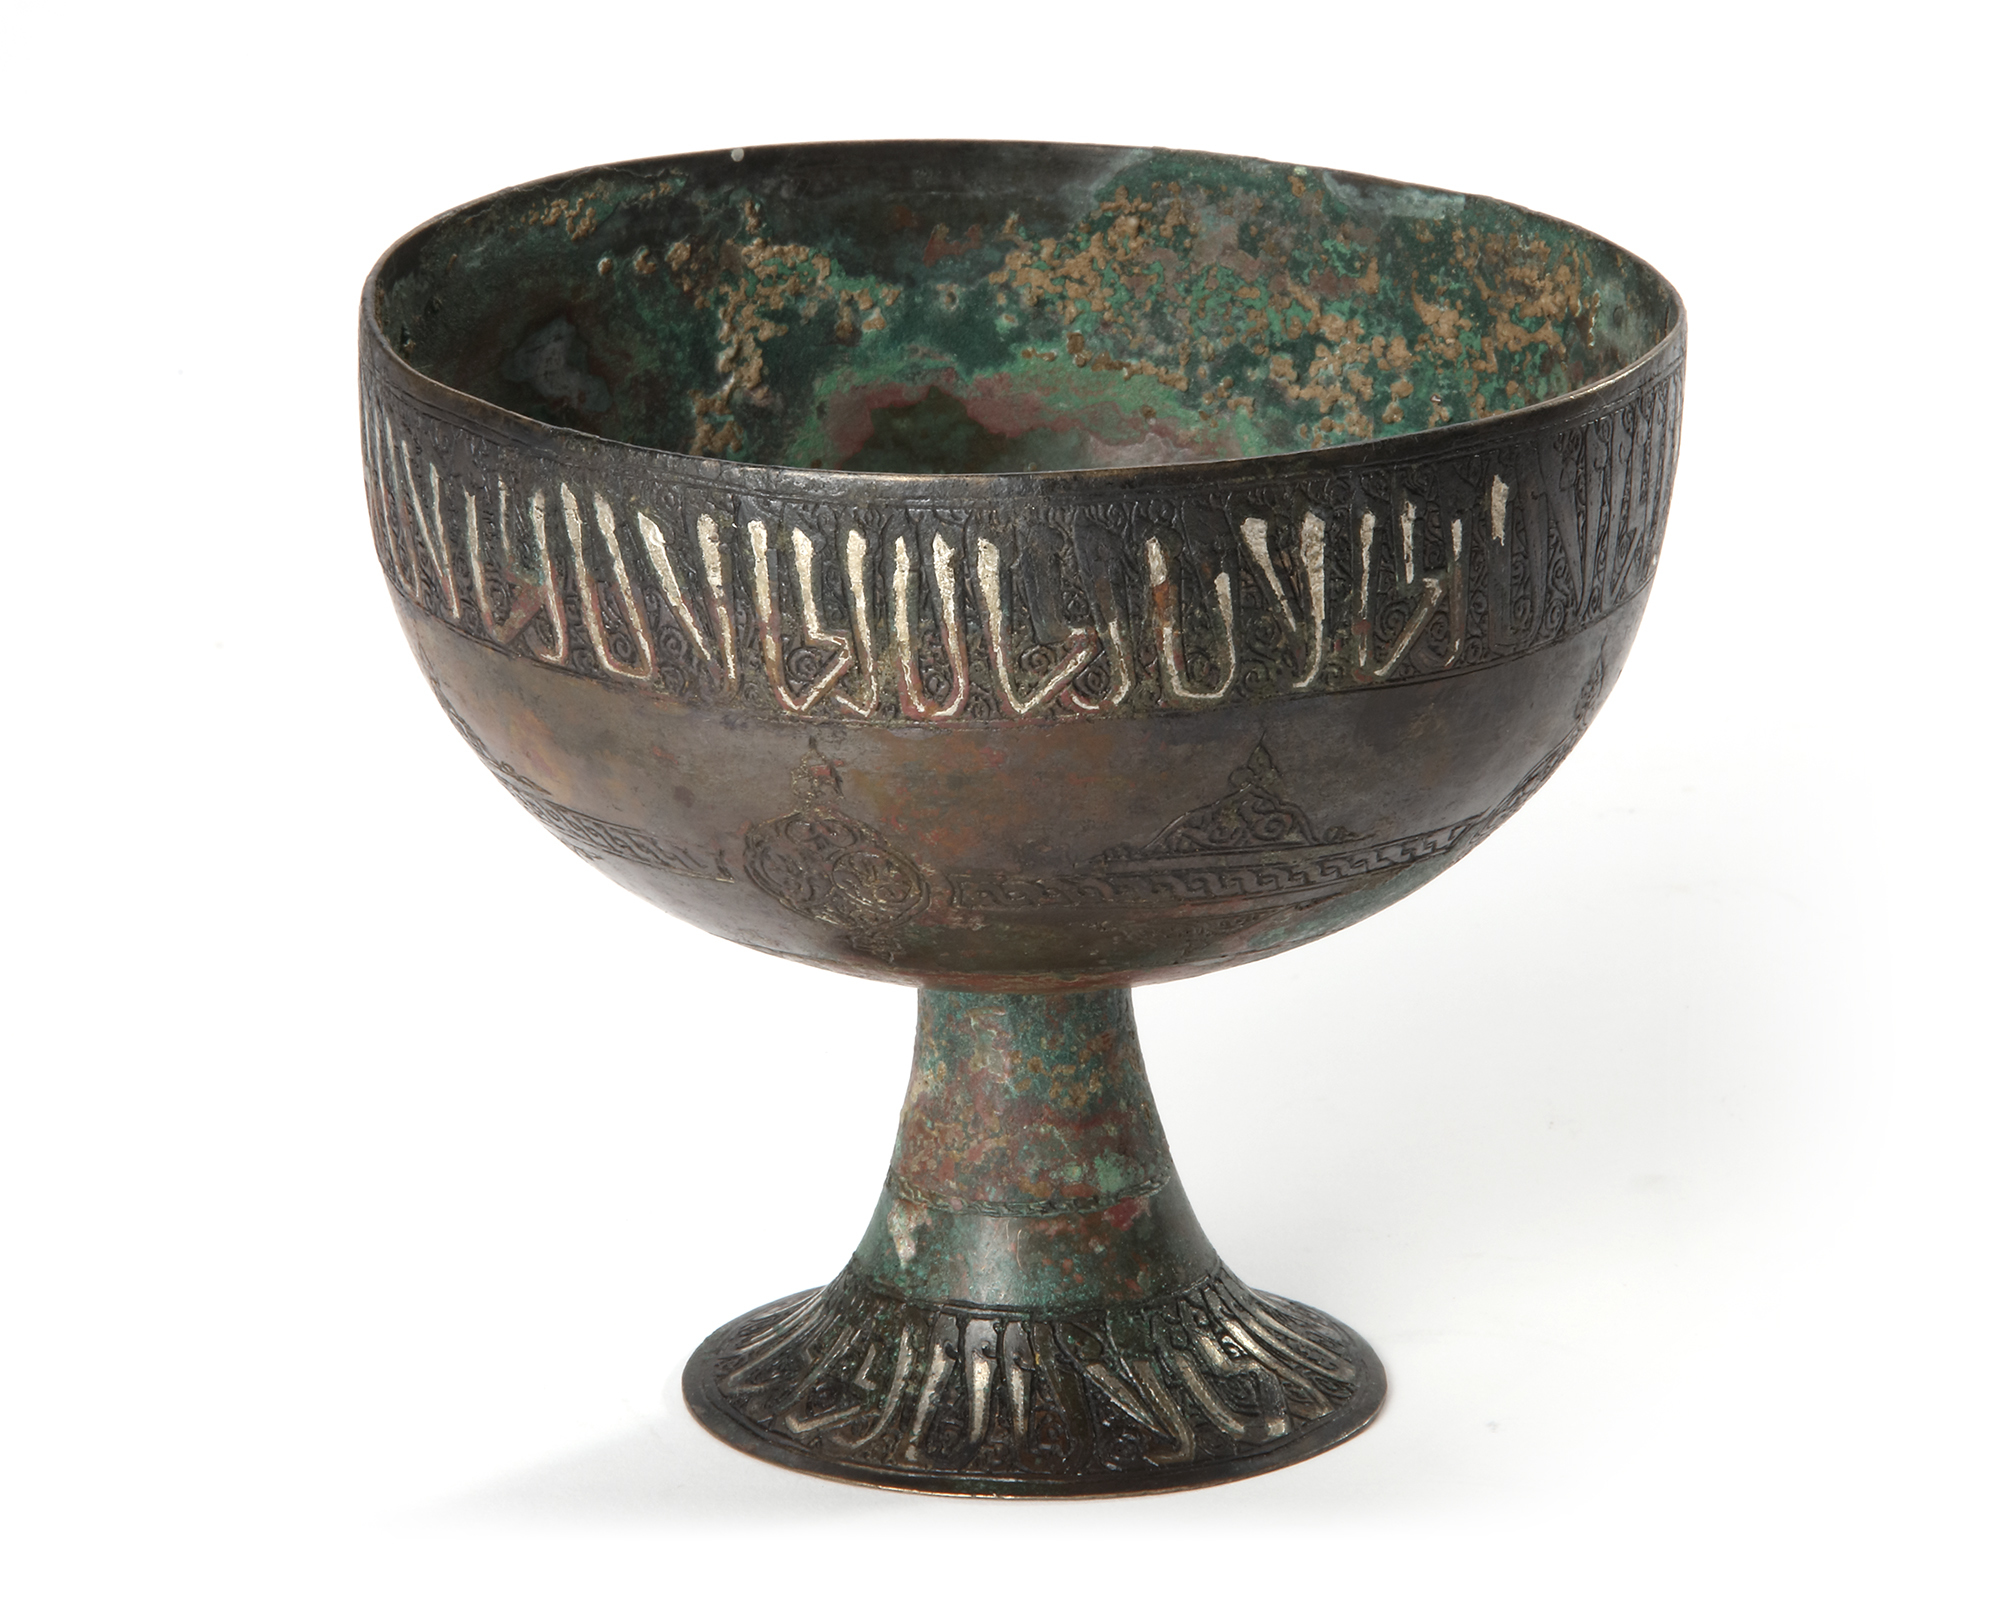 A SILVER-INLAID BRONZE FOOTED BOWL, PERSIA KHORASSAN, 12TH-13TH CENTURY - Image 4 of 6